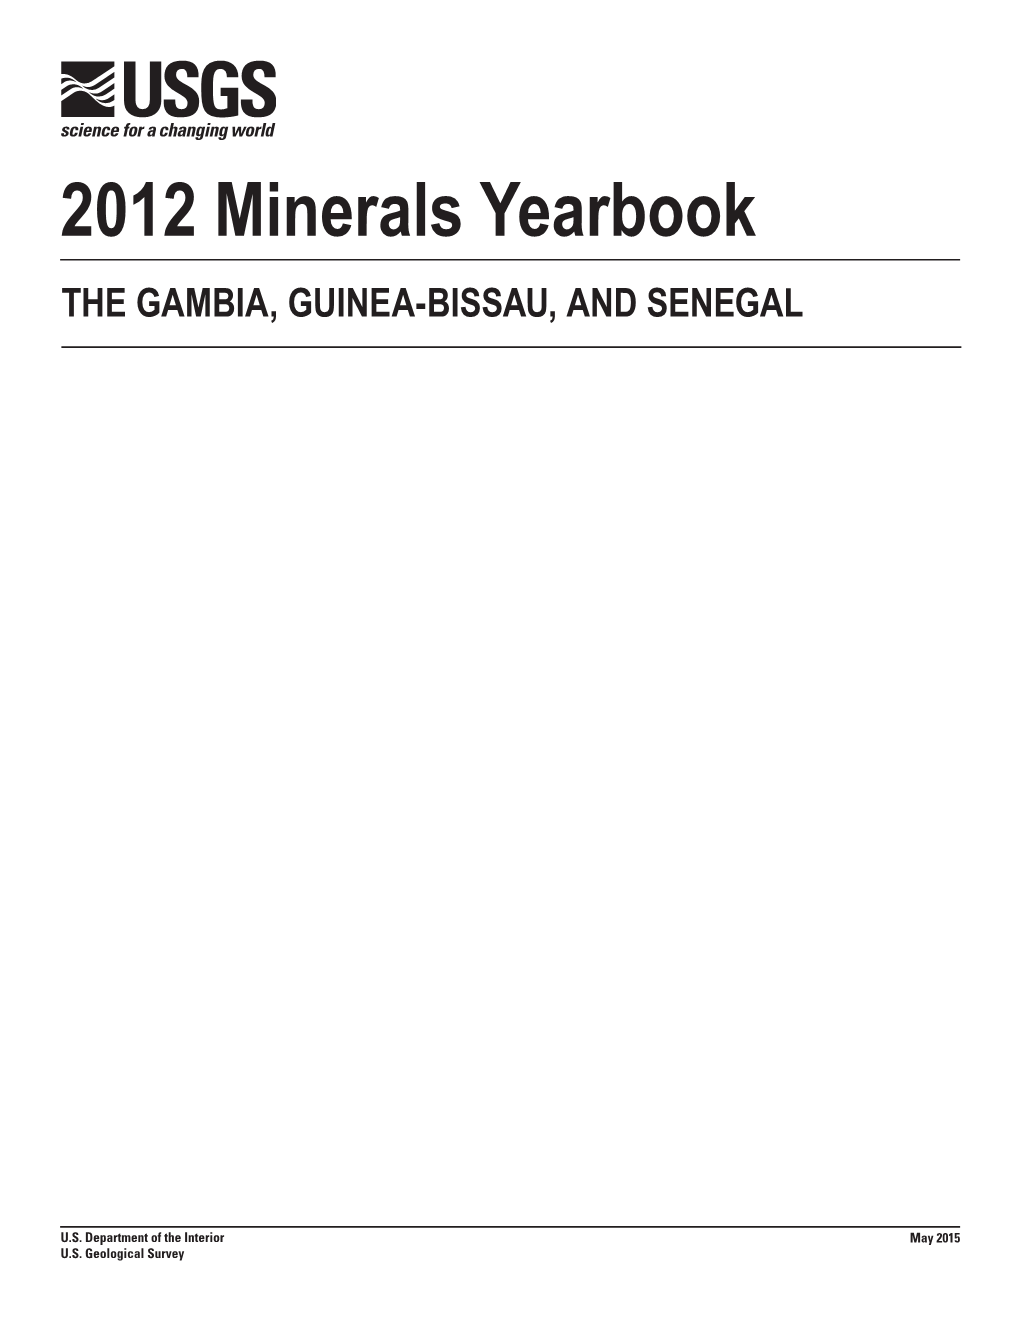 The Mineral Industries of the Gambia Guinea-Bissau, and Senegal in 2012